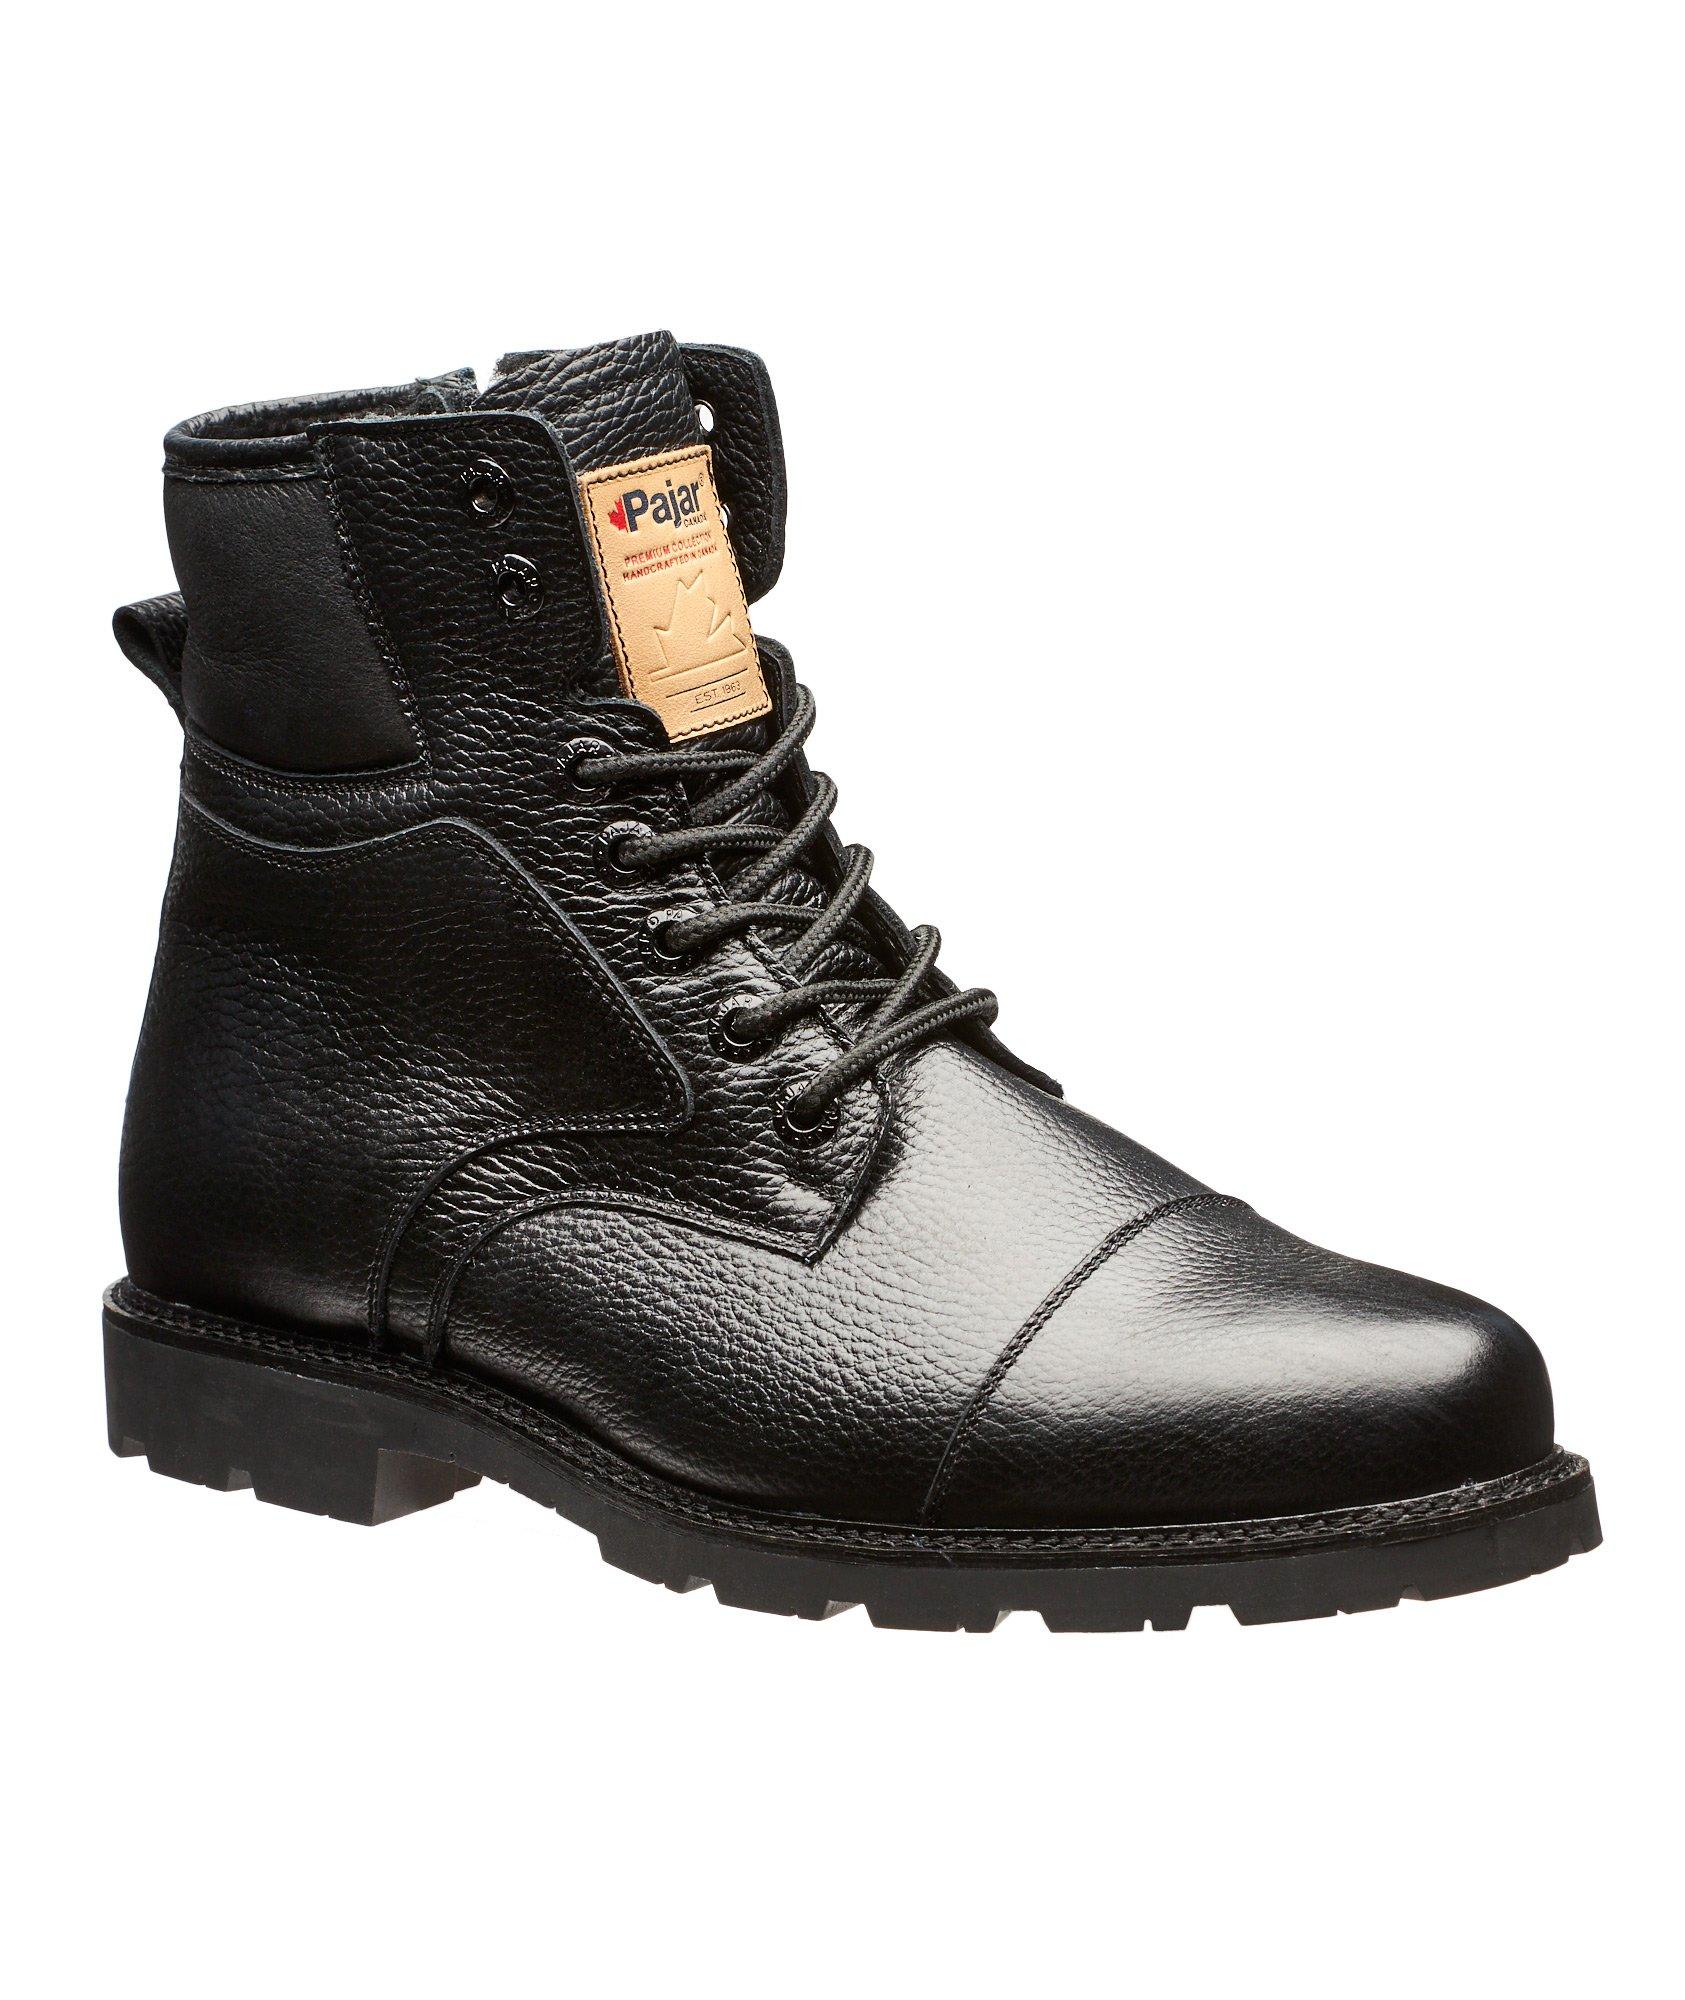 Kevin Shearling-Lined Boots image 0